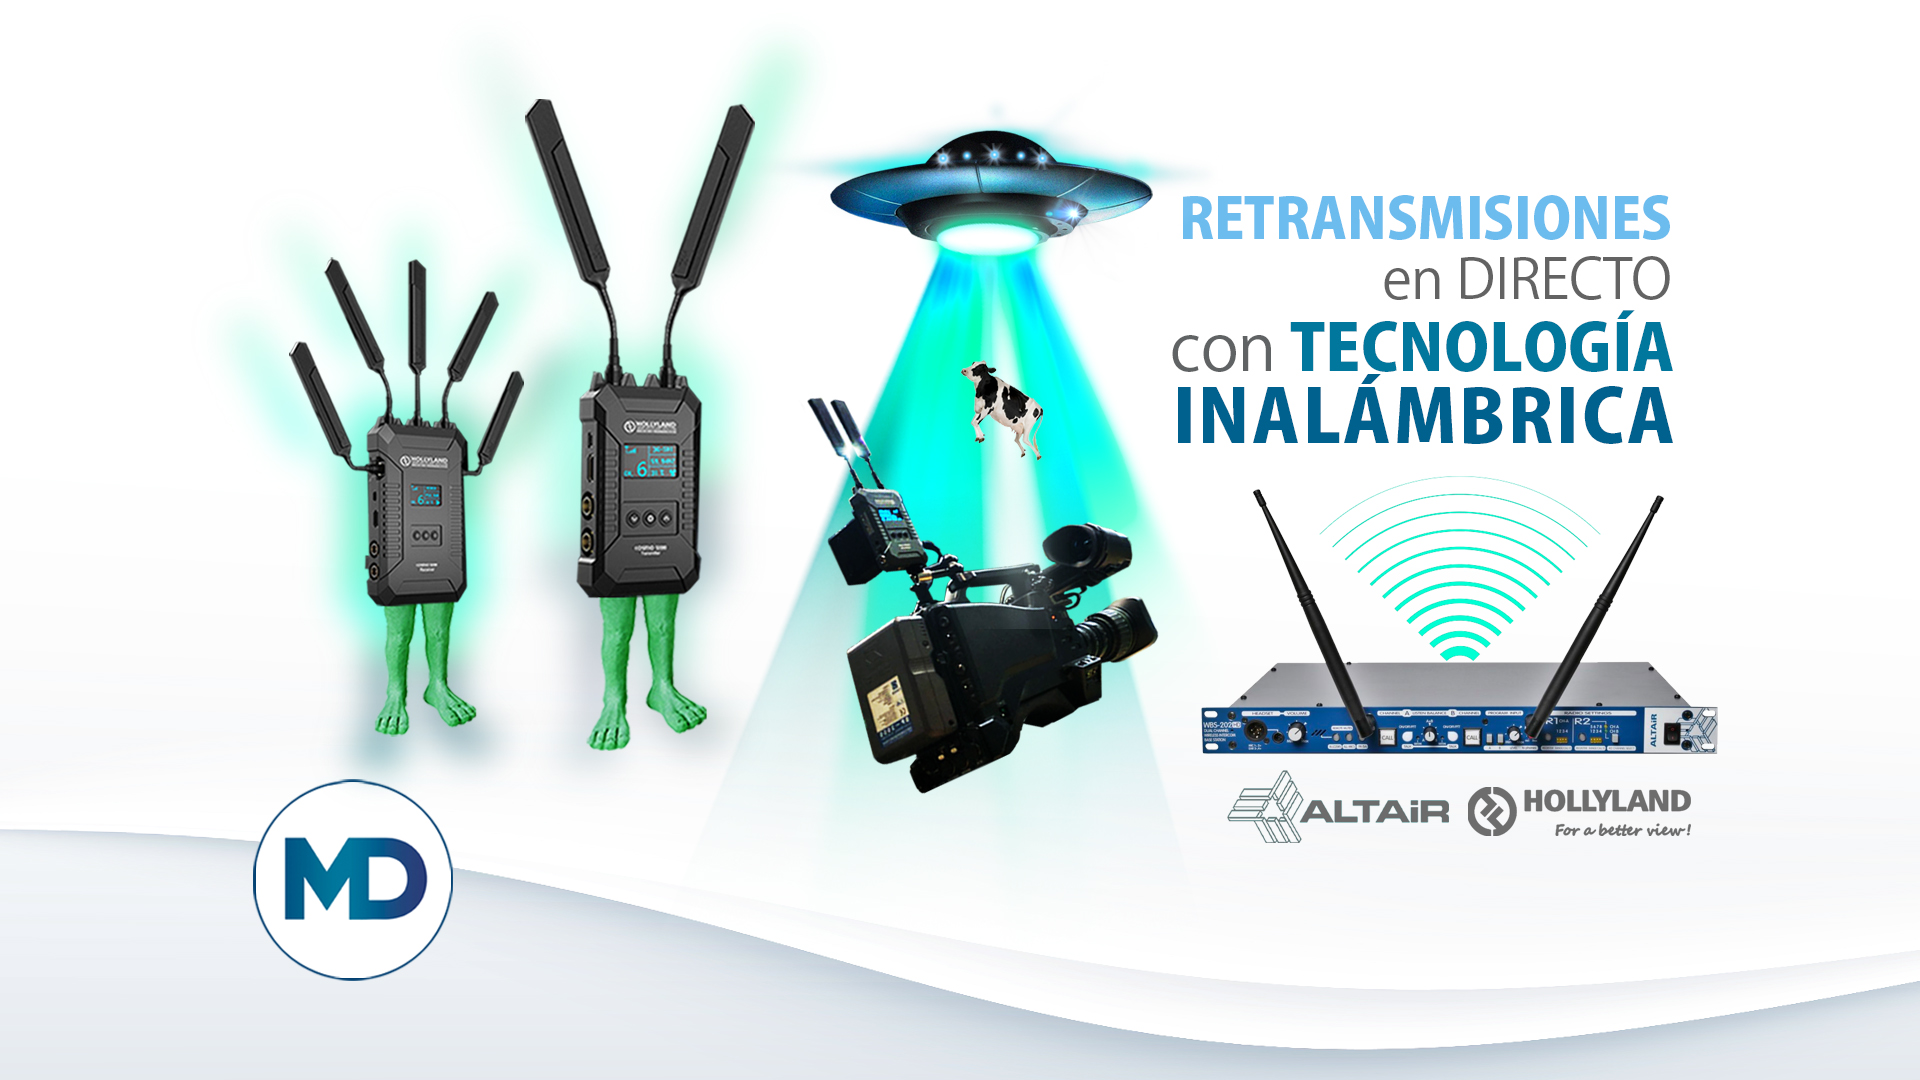 Live broadcasts with wireless technology